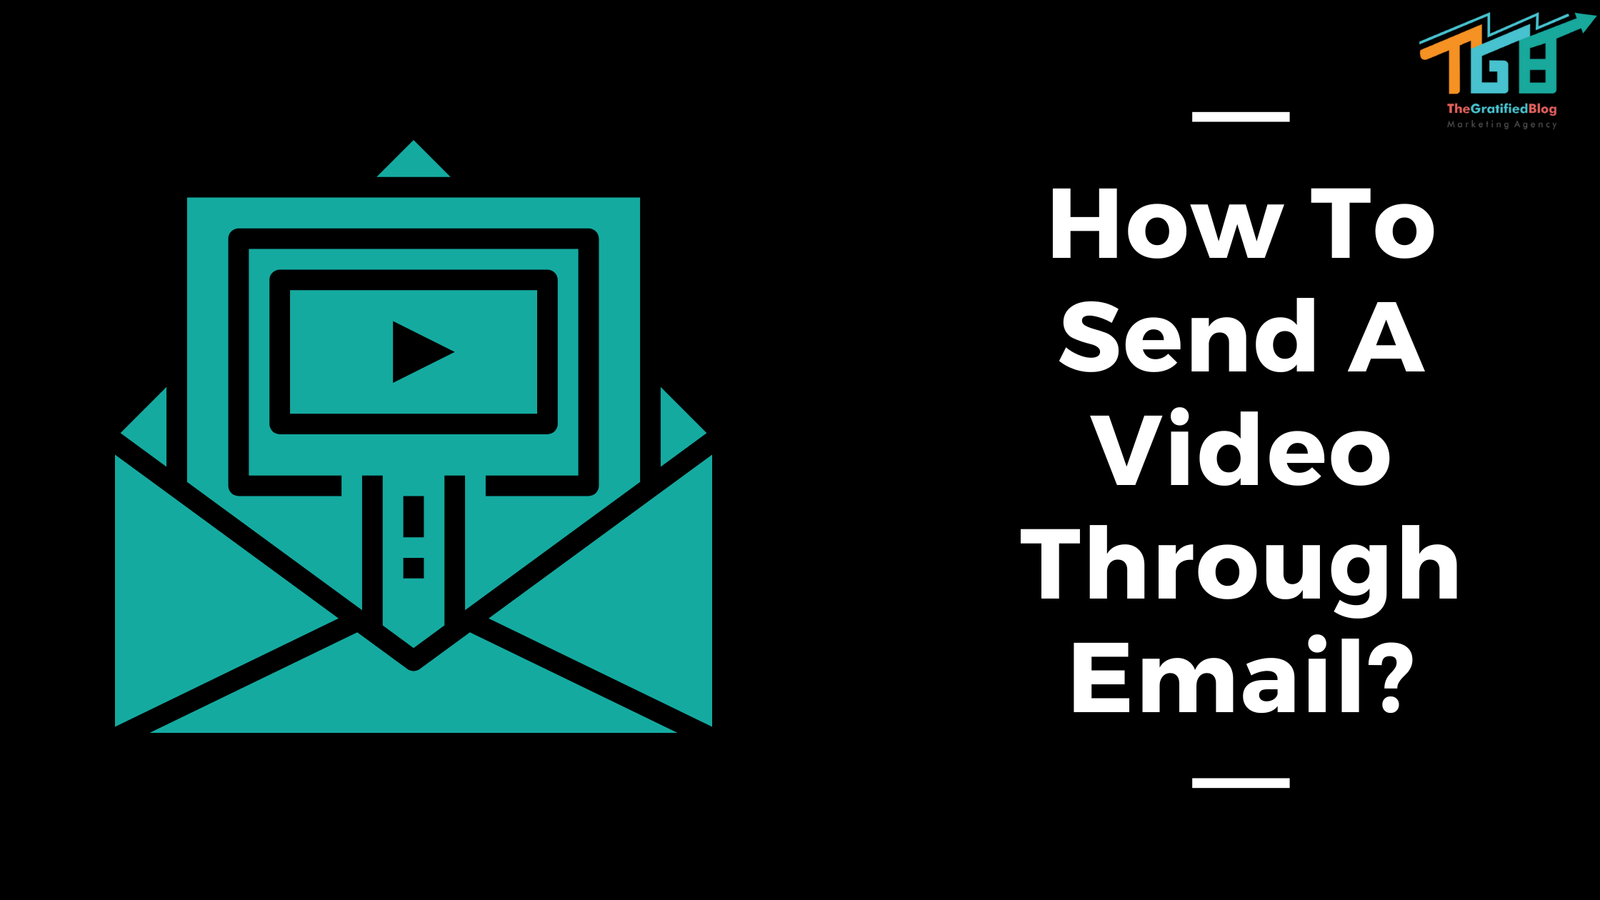 How To Send A Video Through Email without worrying about the size?